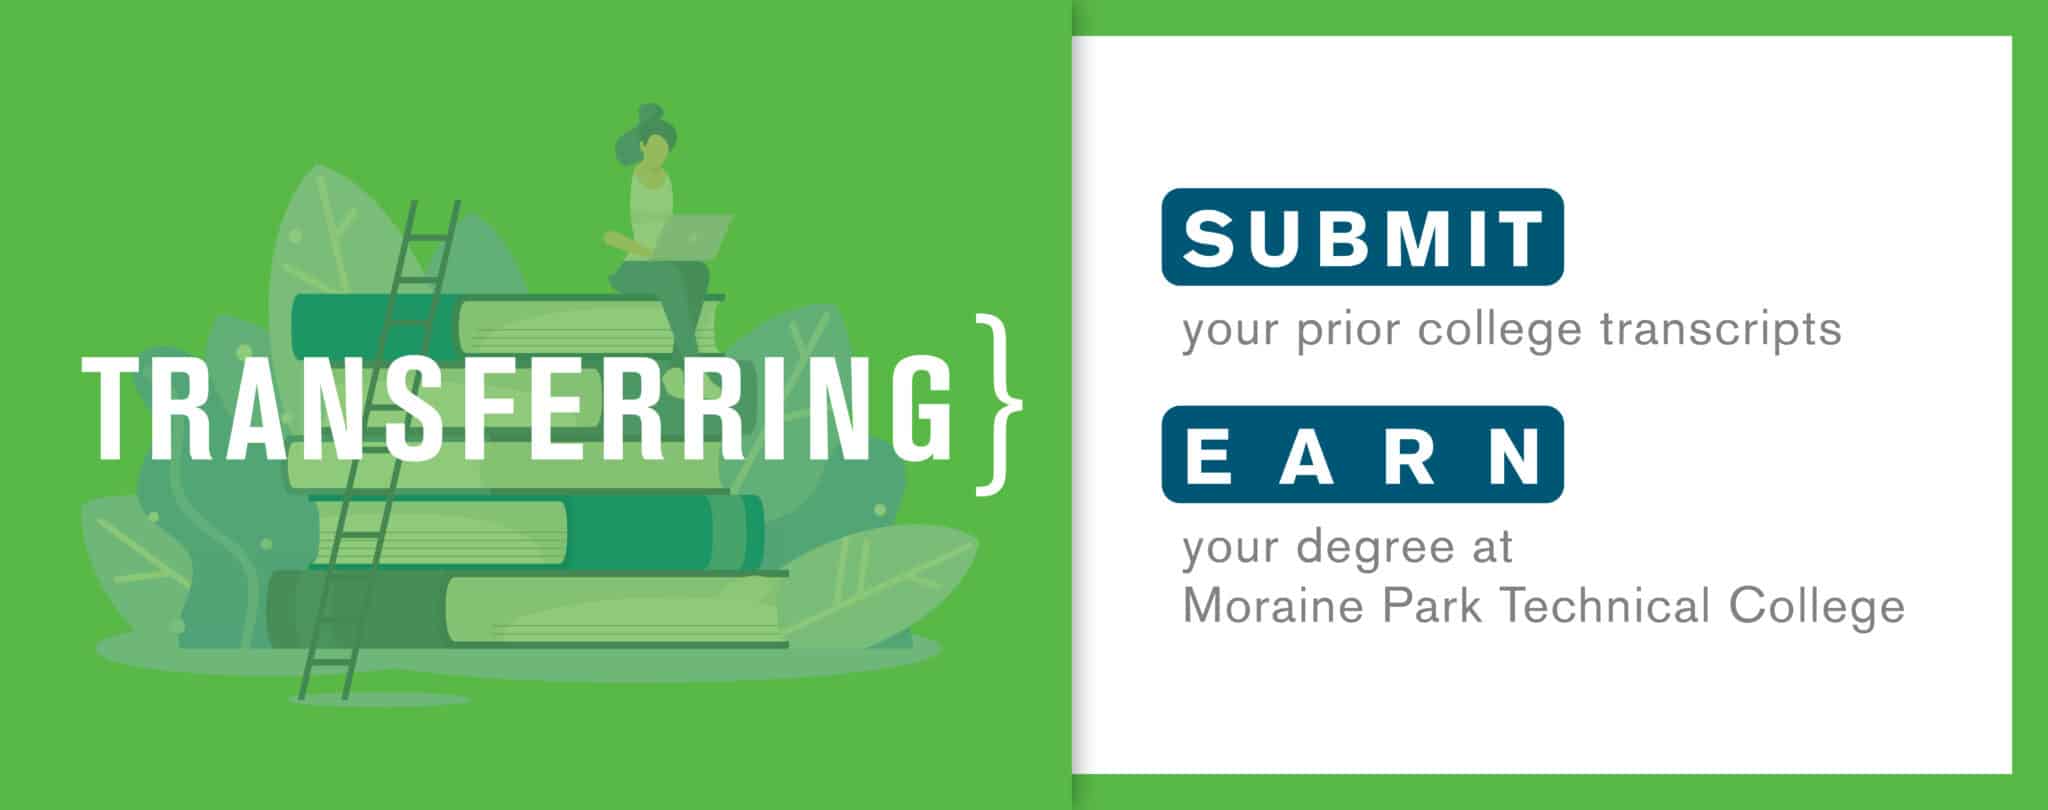 Transferring - Submit your prior college transcripts. Earn your degree at Moraine Park Technical College.